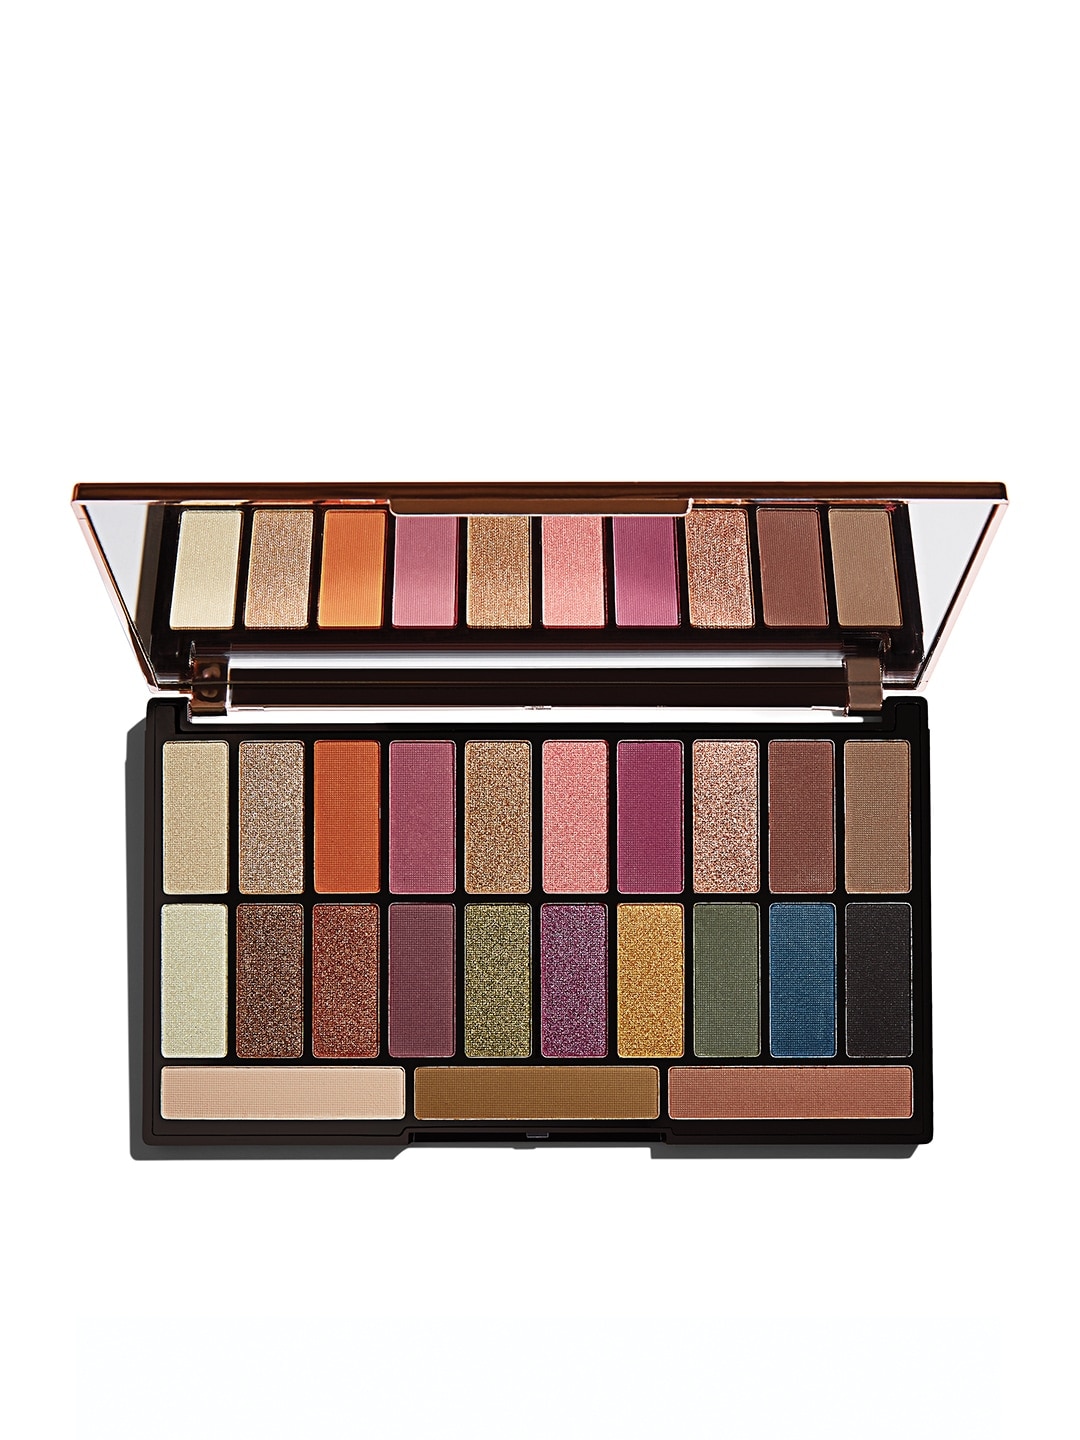 Makeup Revolution X Tammi Eyeshadow Palette - Tropical Paradise 23.3 g Price in India